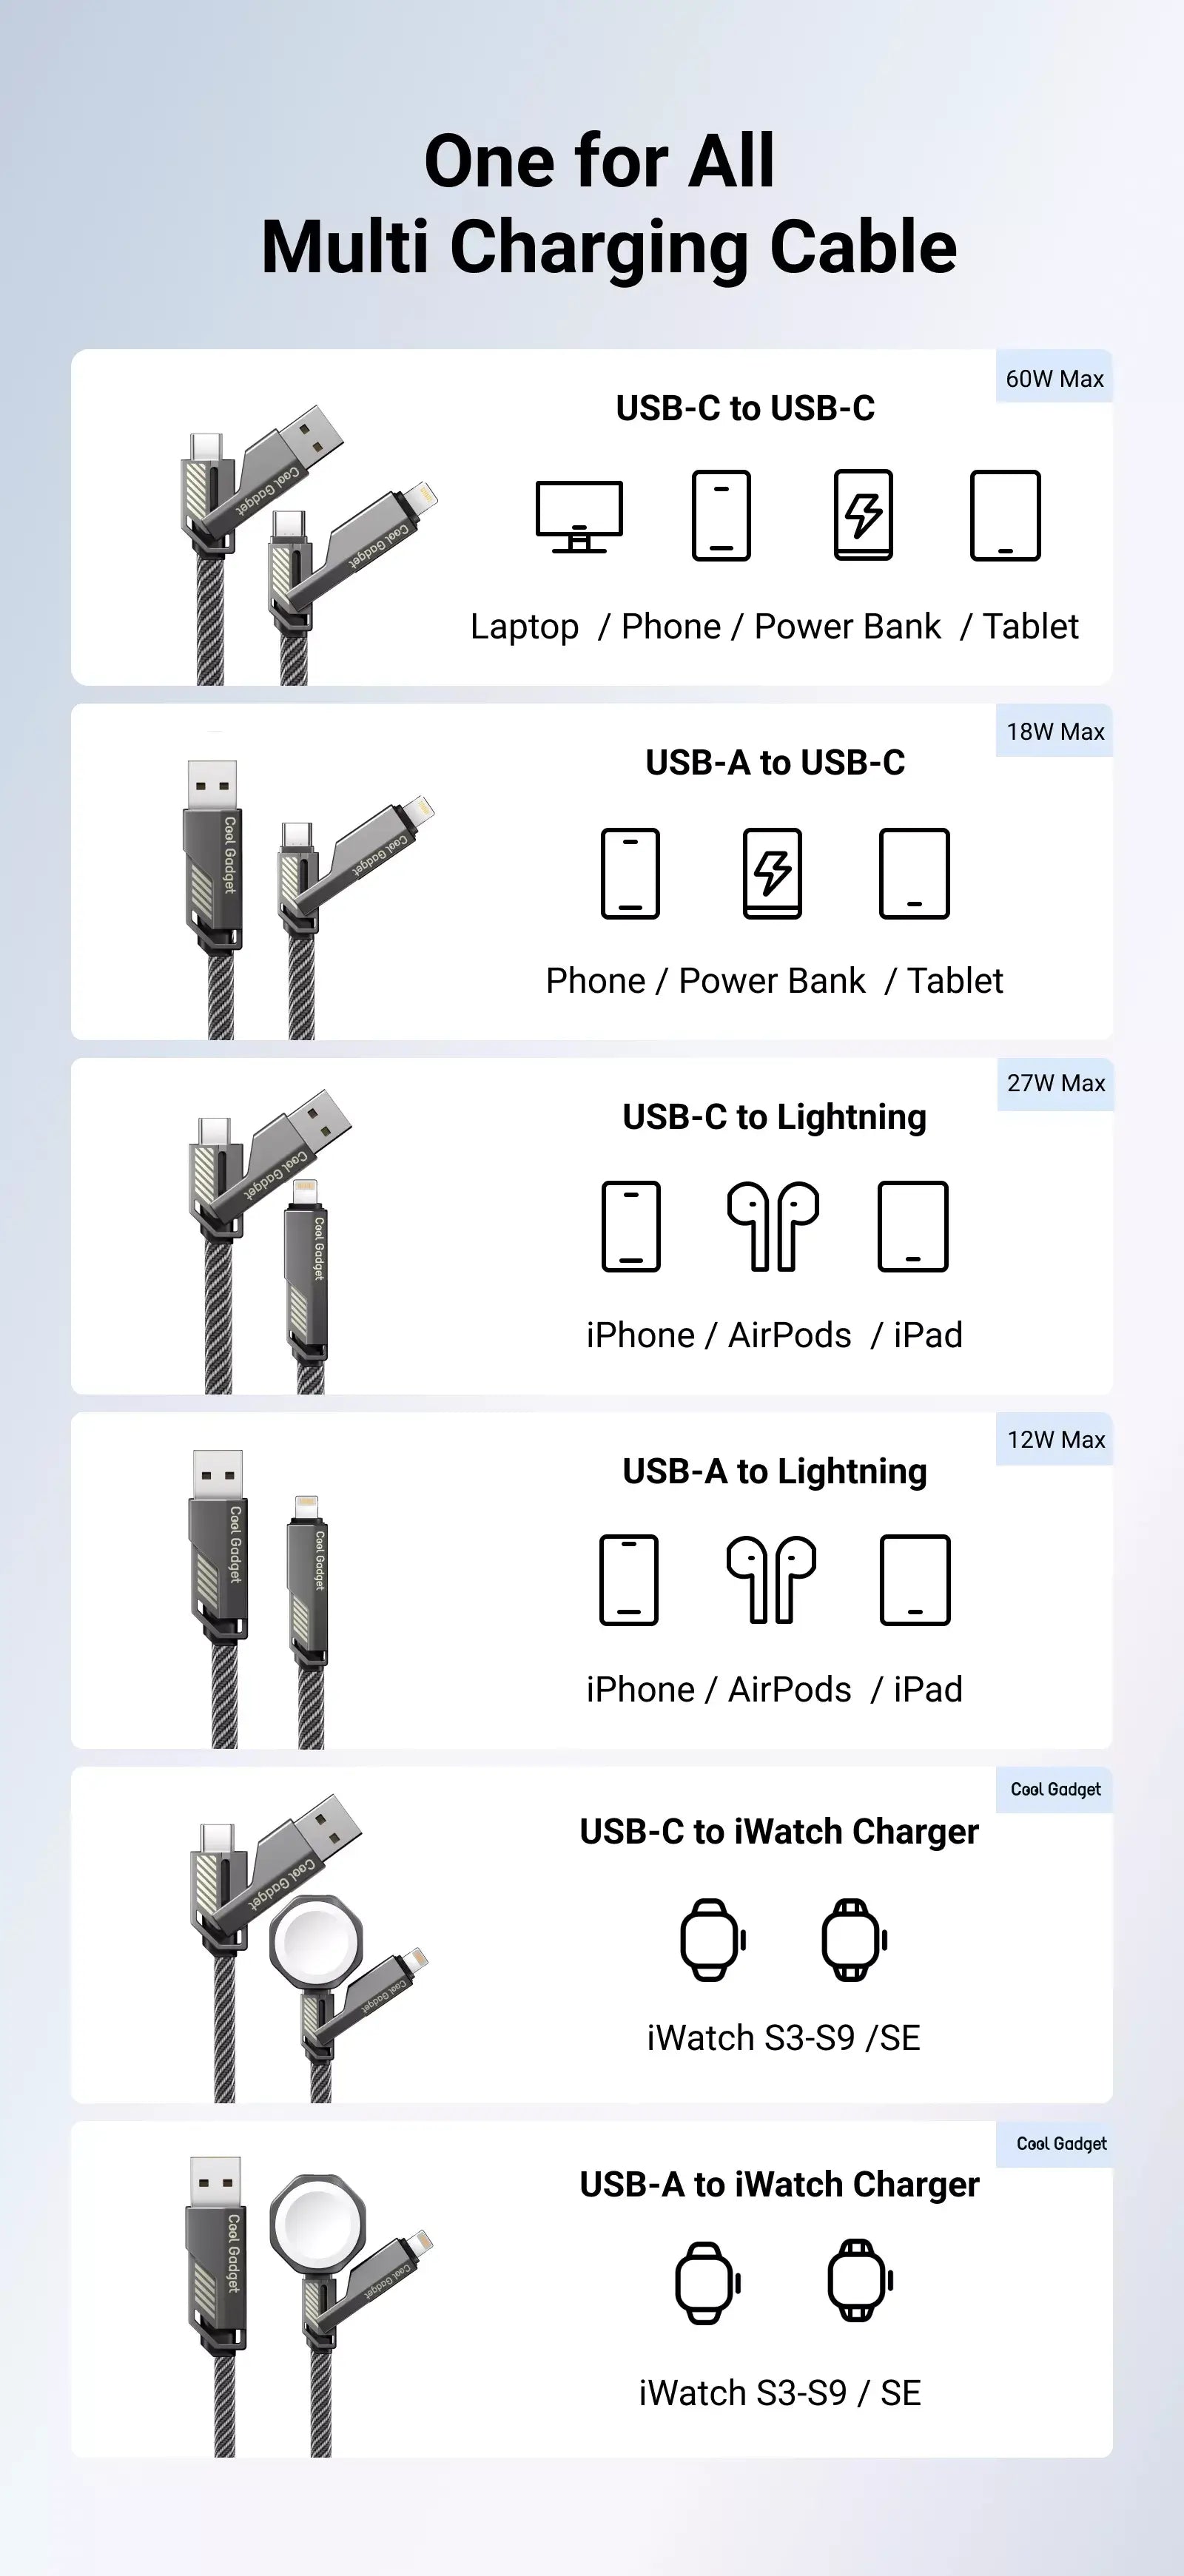 cool-gadget-6-in-1-60w-nylon-fast-charging-usb-c-cable-with-apple-watch-charger-5ft-description2